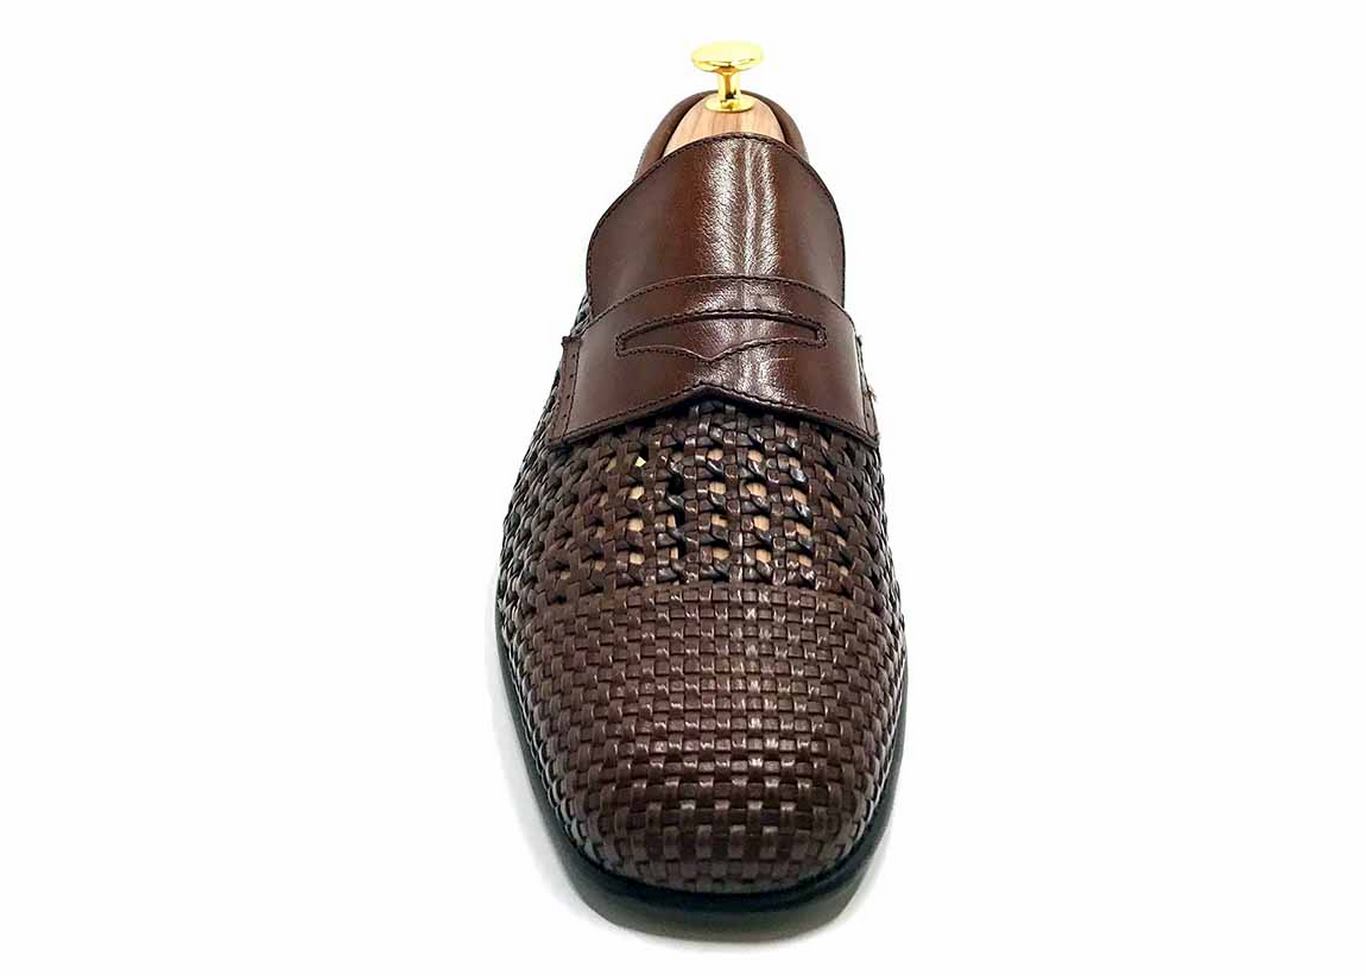 Comfort Loafer in Brown woven leather